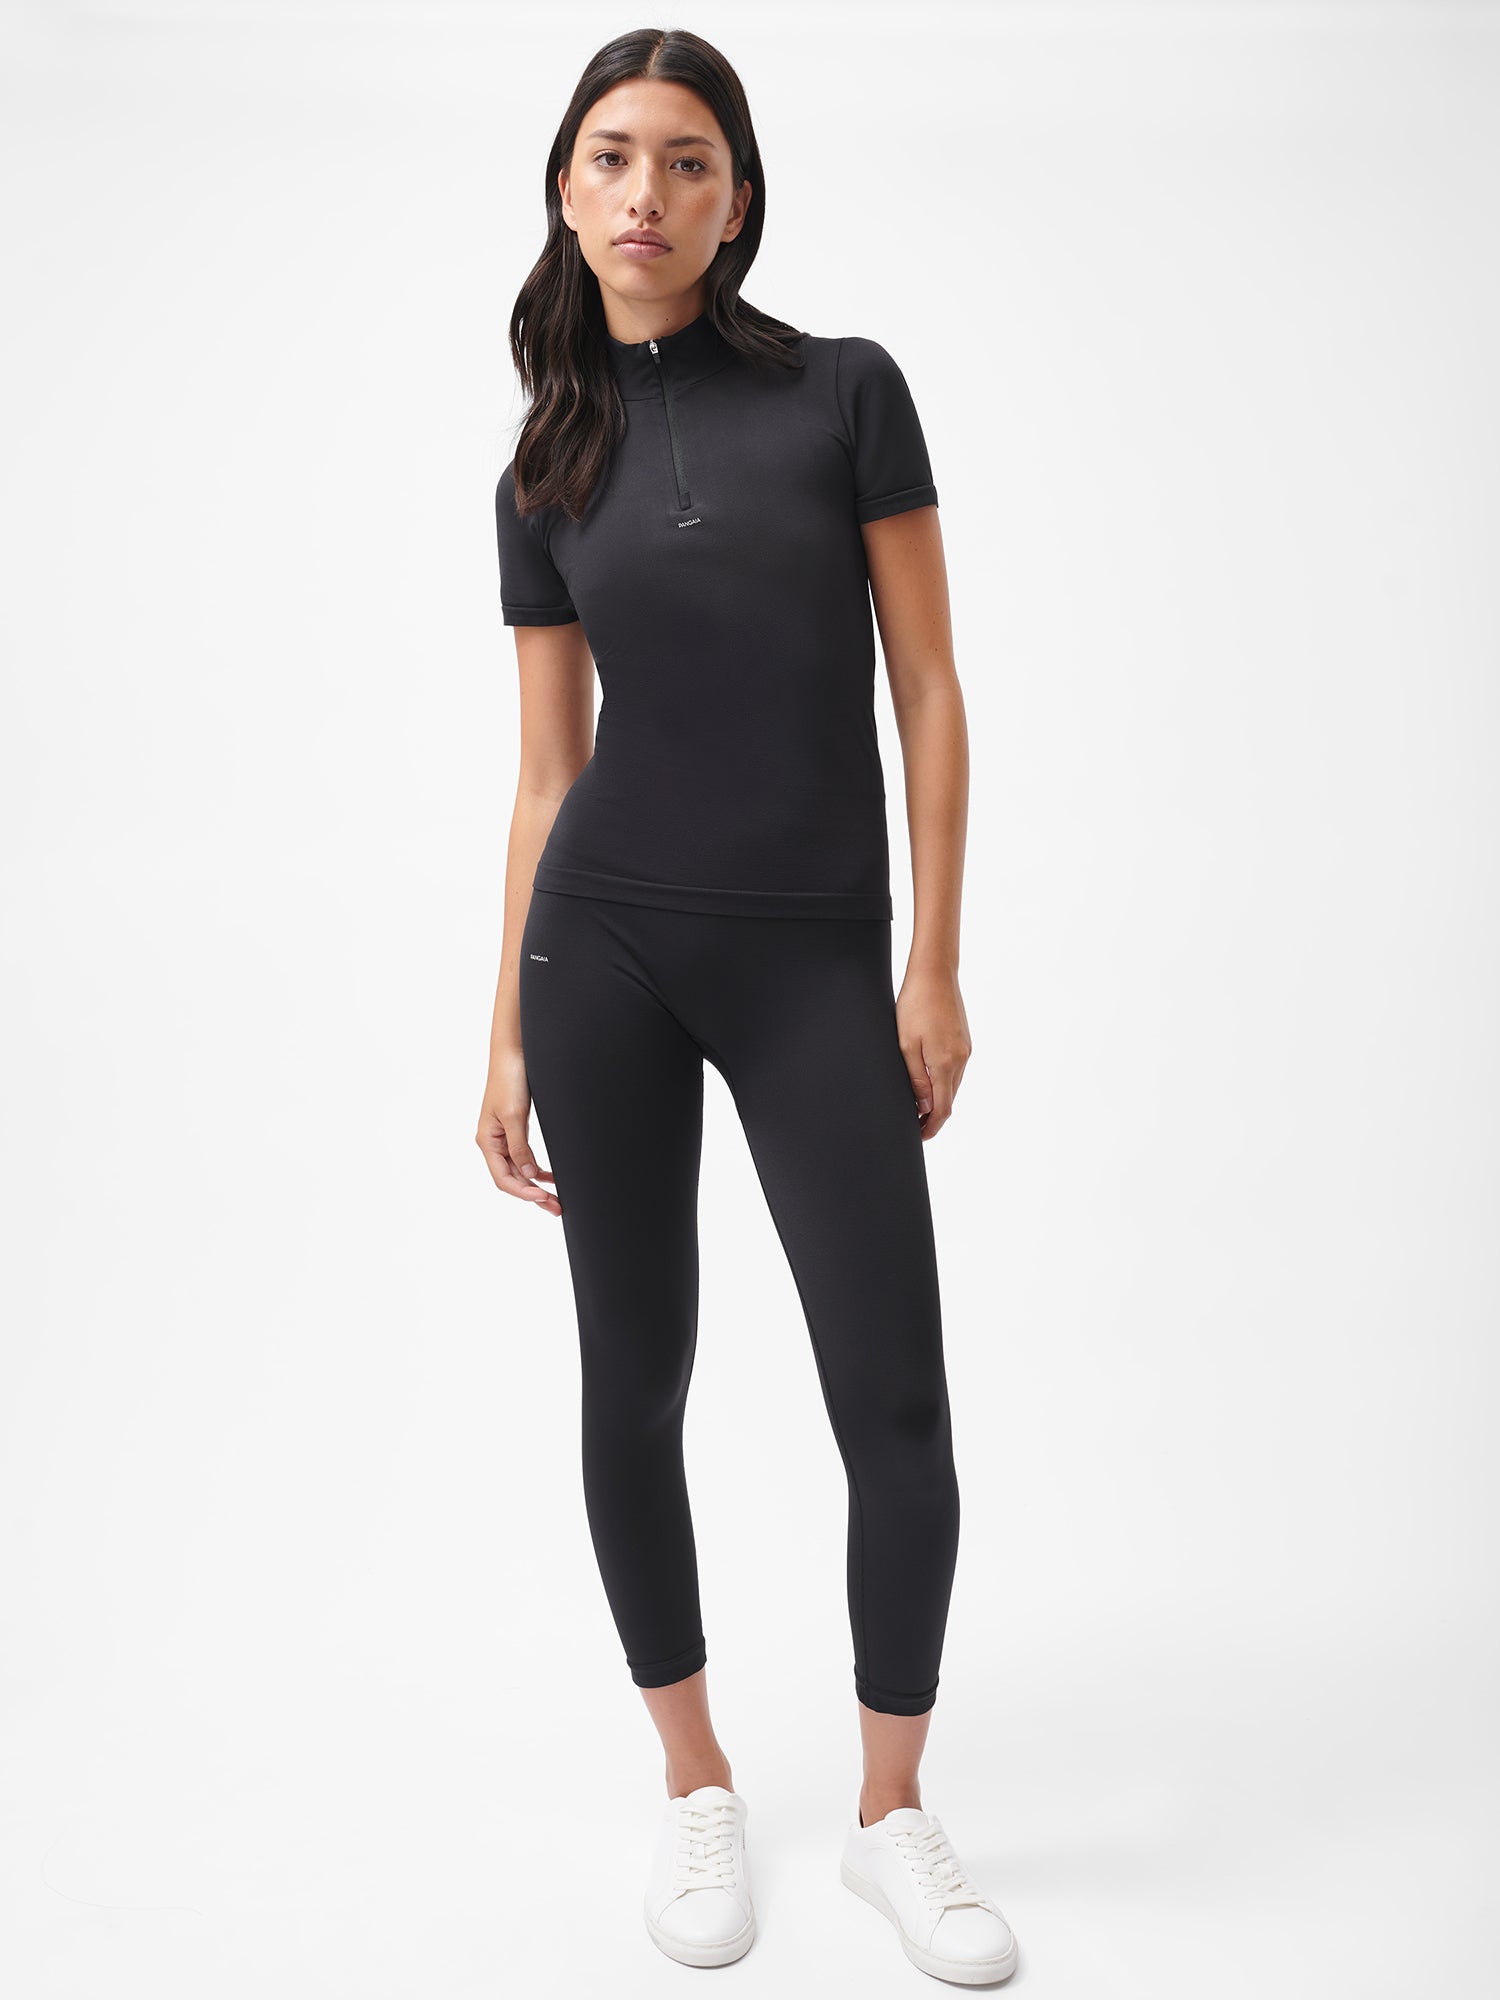 Womens-Active-Seamless-SS-Zip-Top-Black-female-4